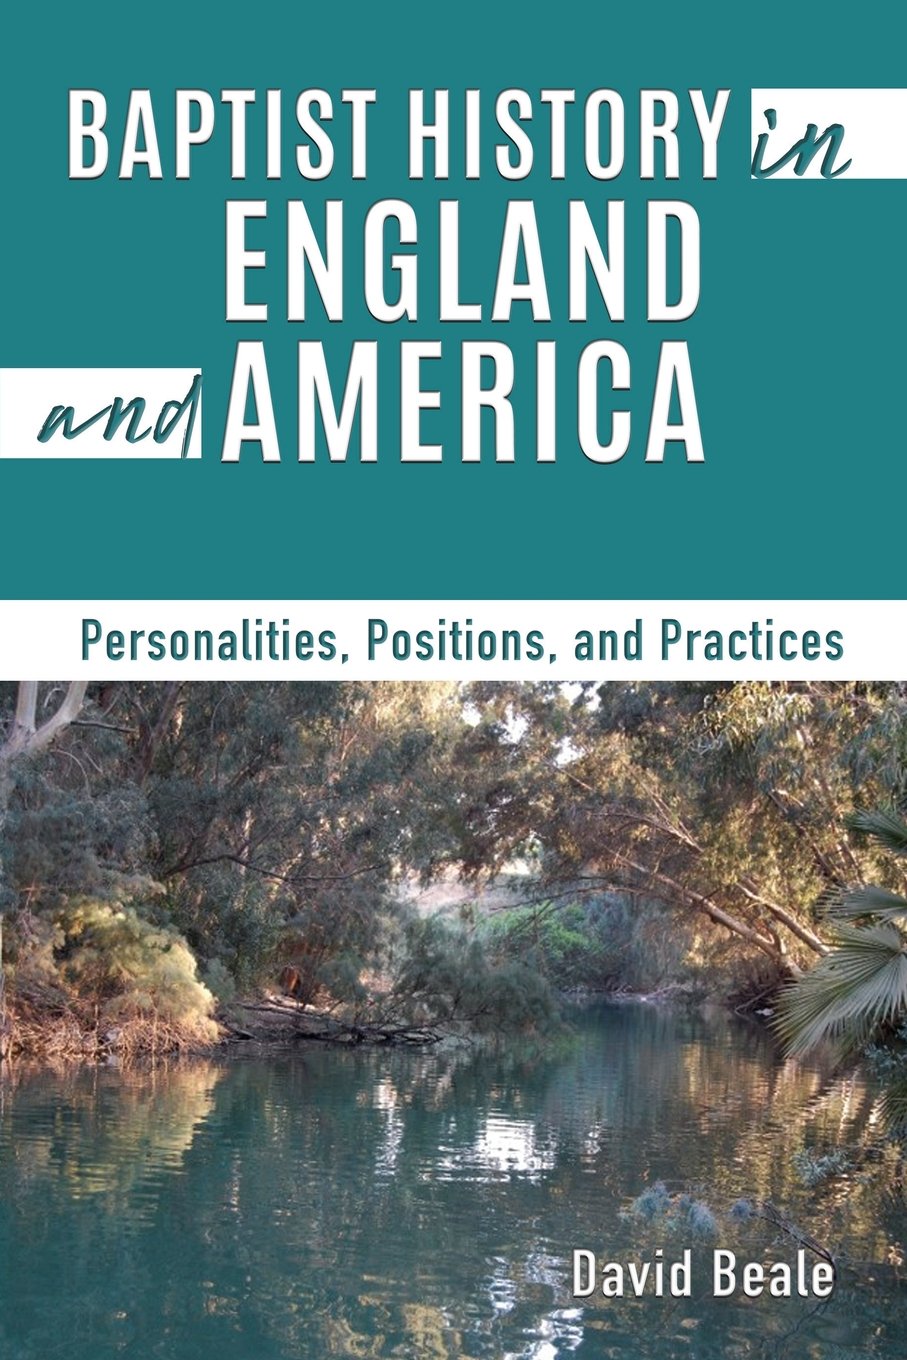 Book Notice: BAPTIST HISTORY IN ENGLAND AND AMERICA: PERSONALITIES, POSITIONS, AND PRACTICES, by David Beale